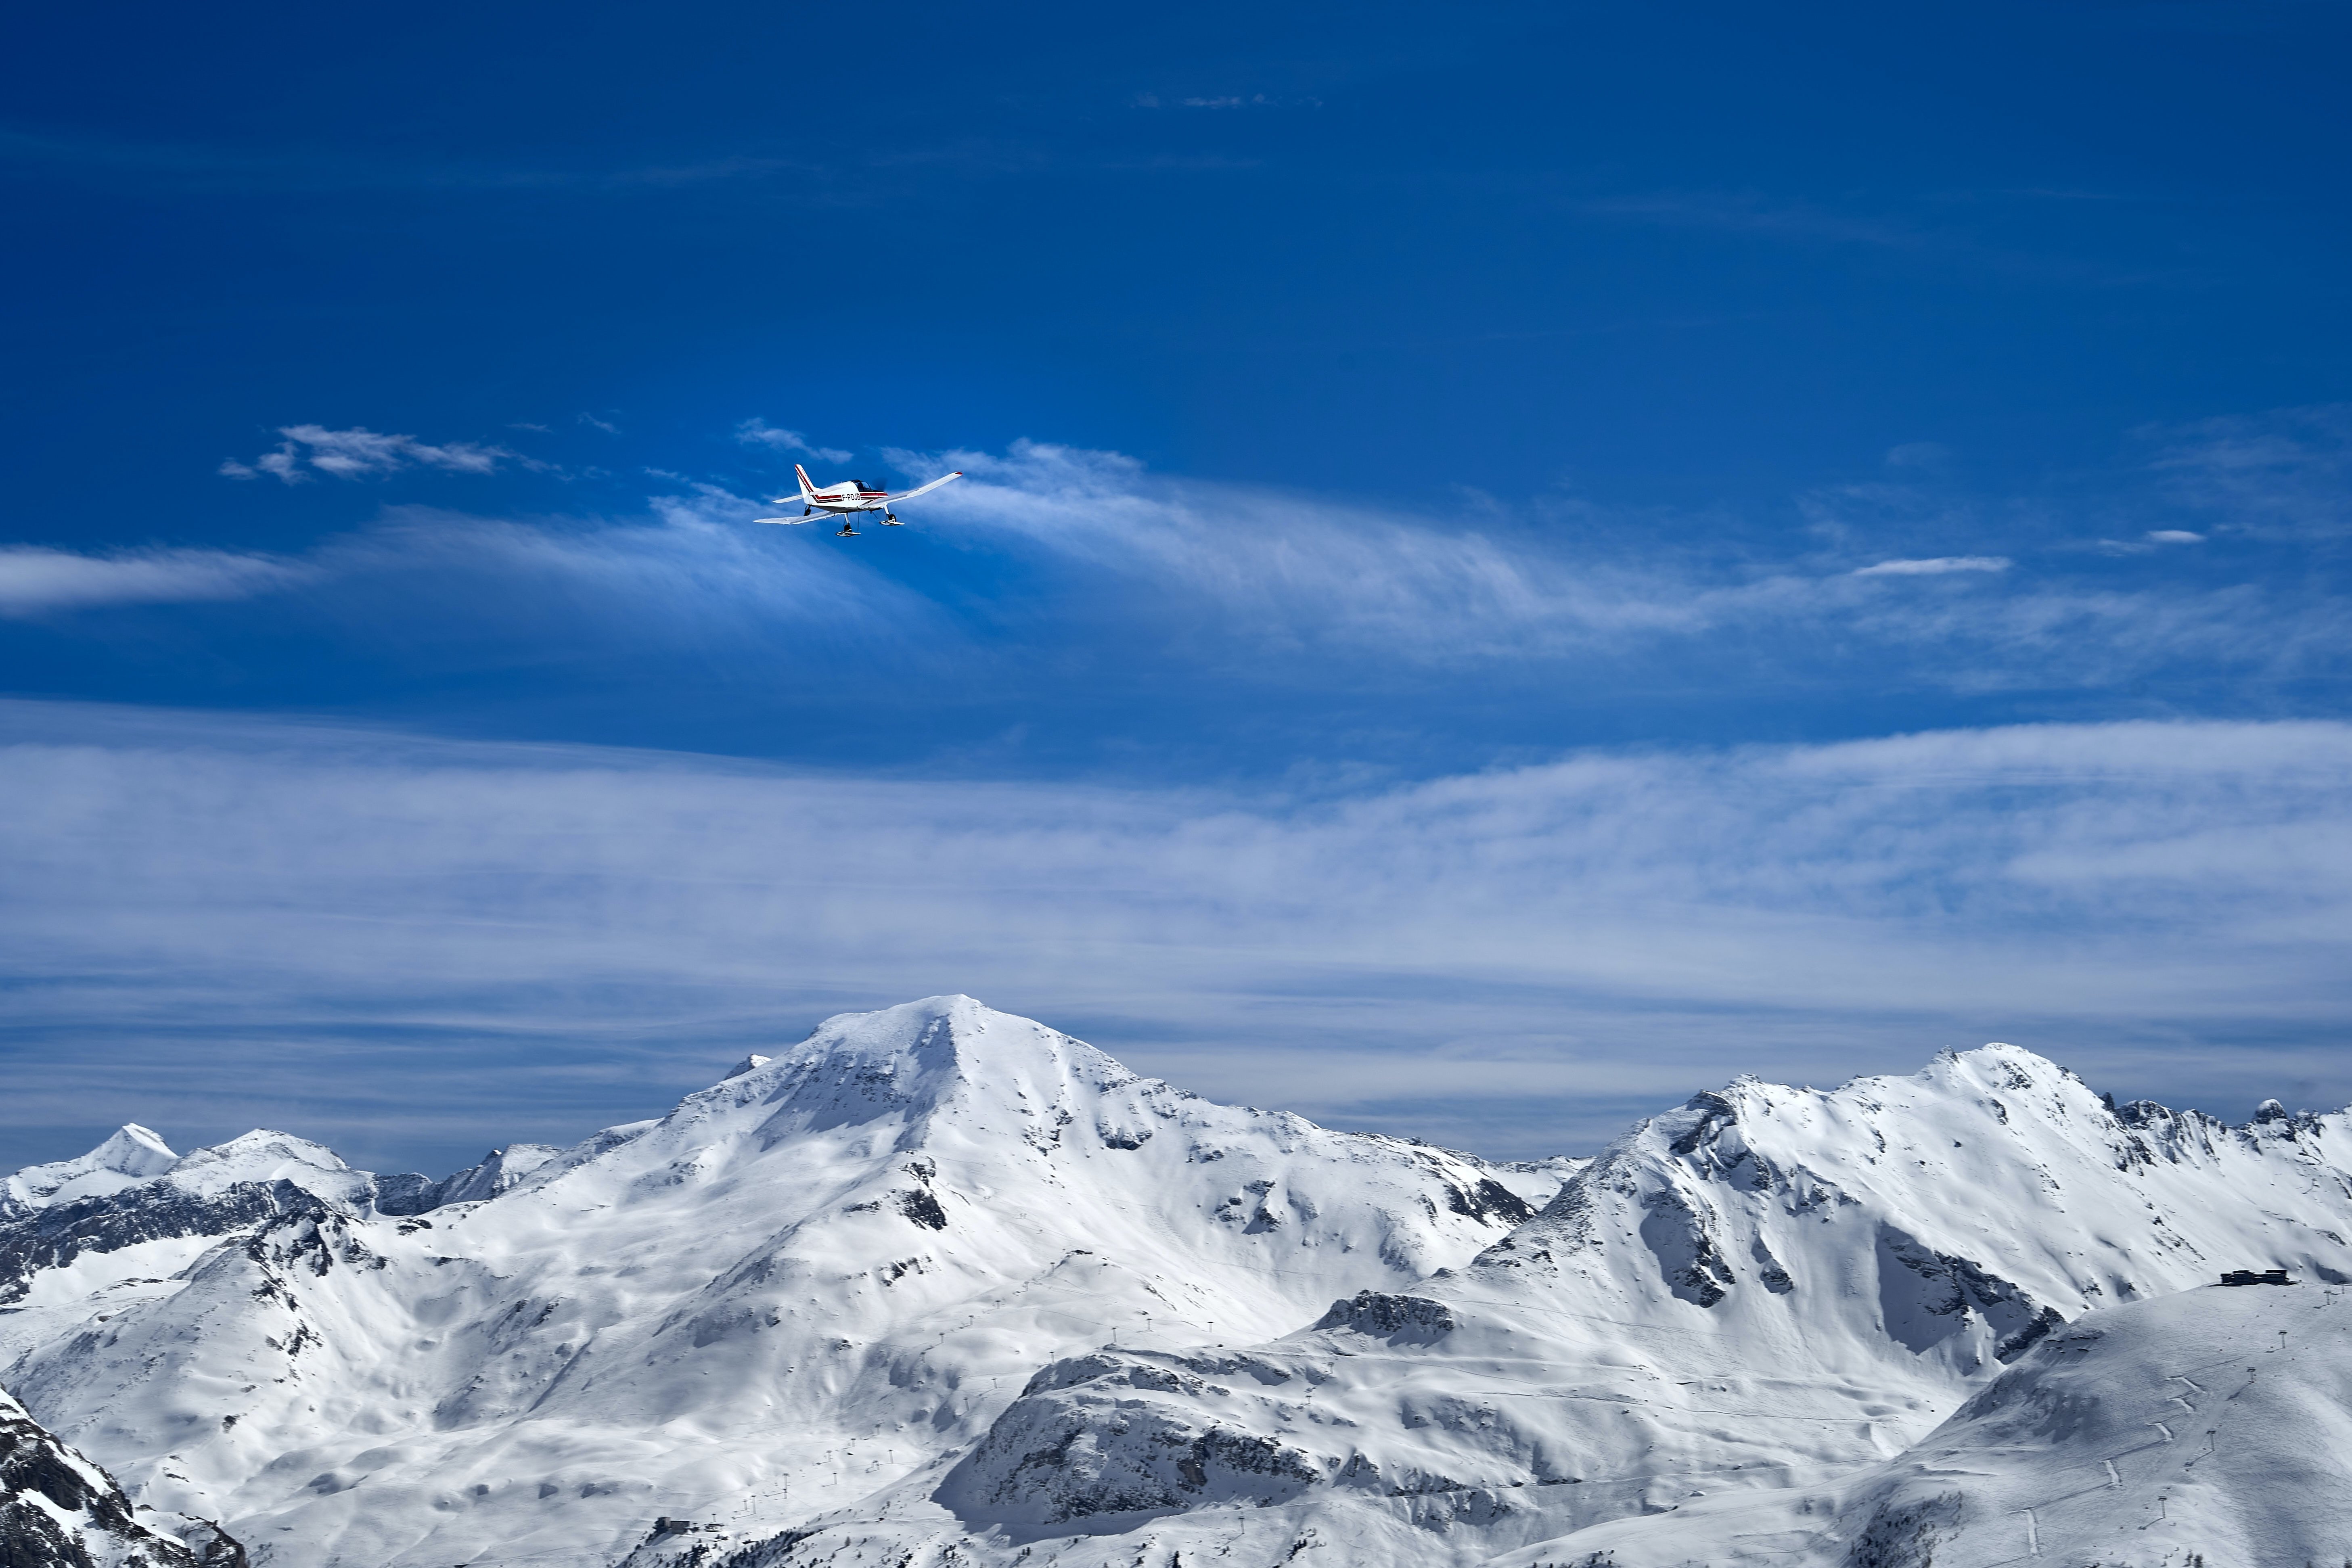 Flying over the mountains in winter